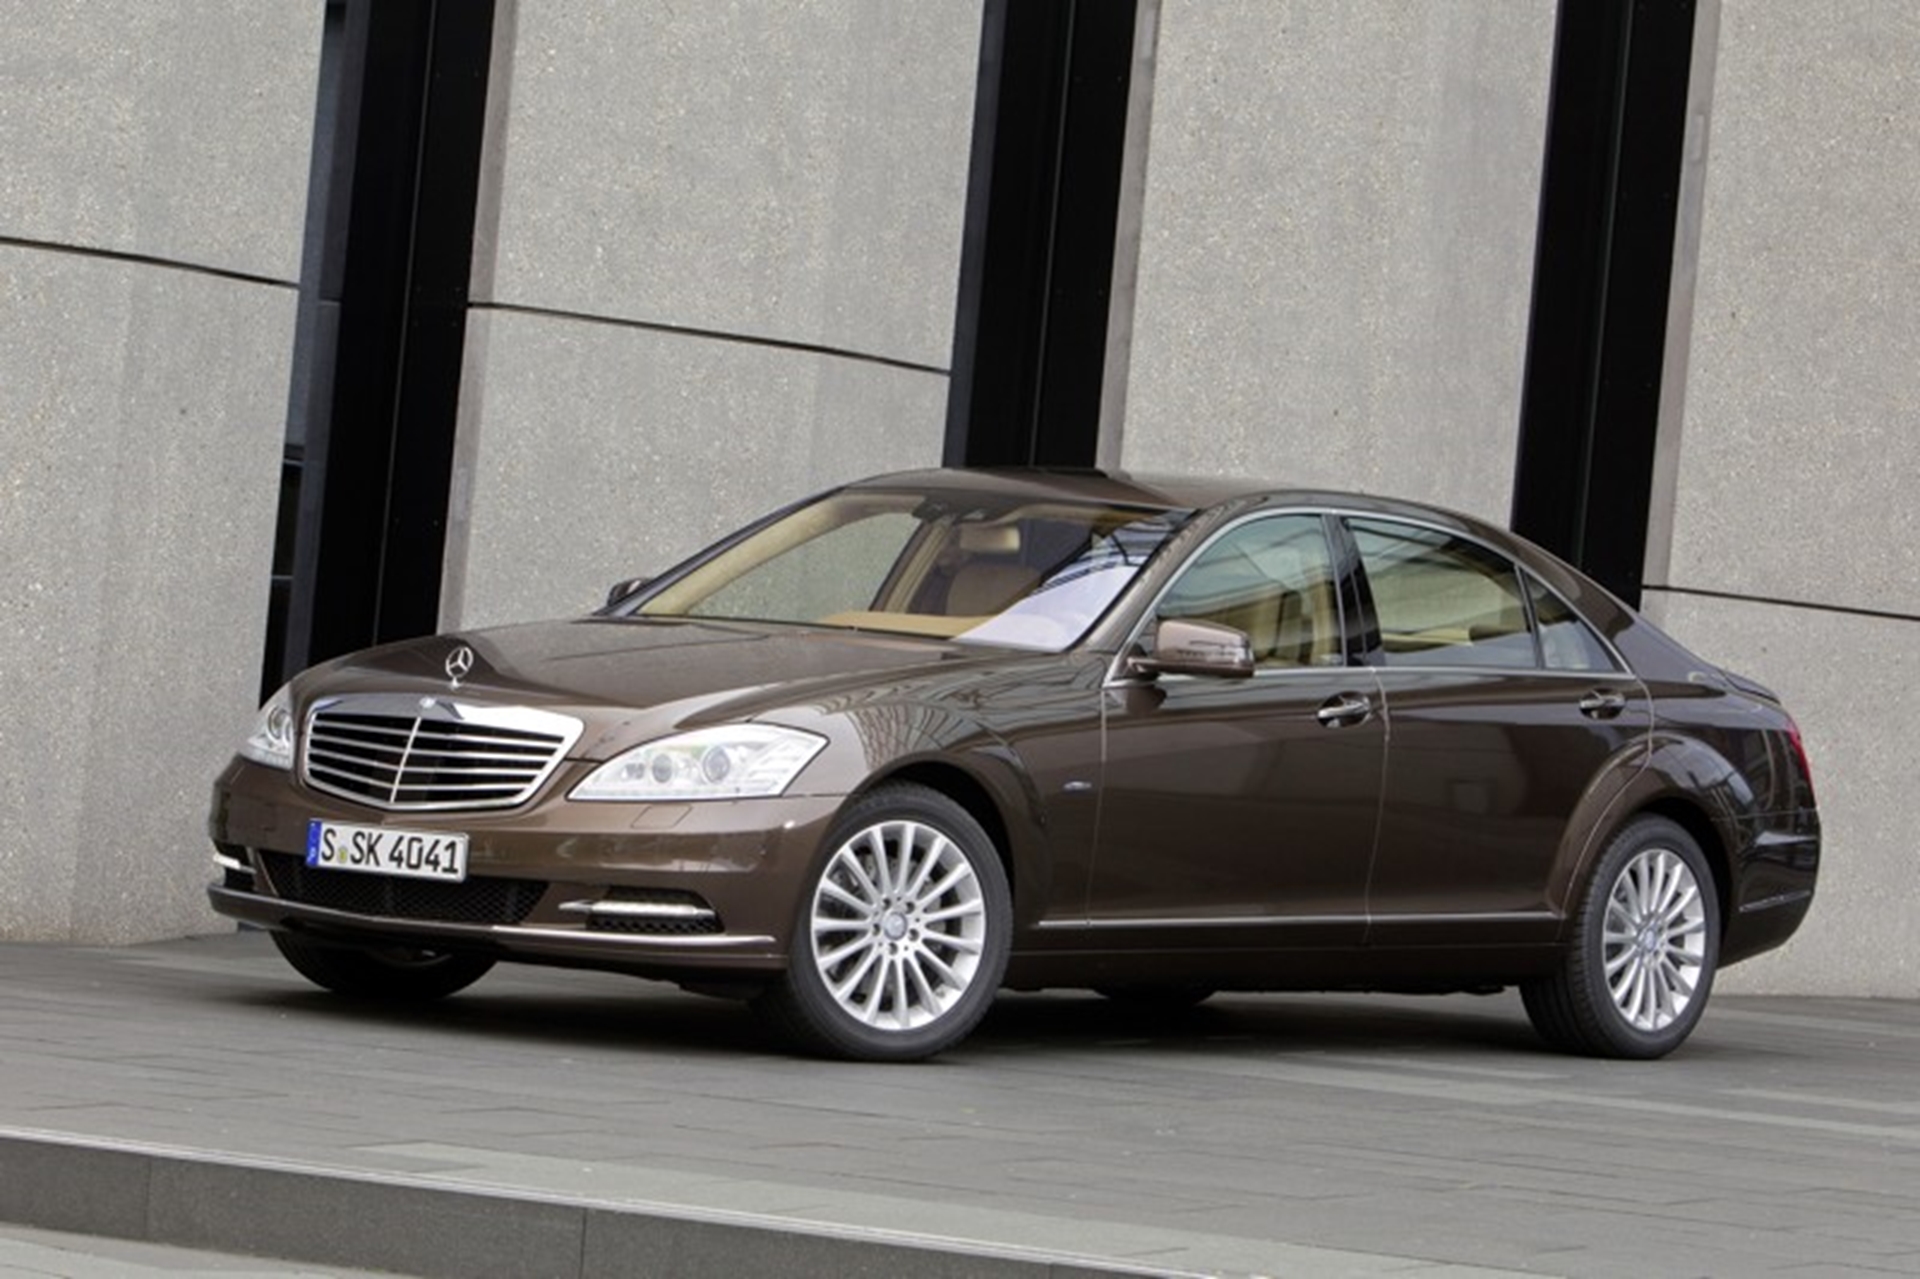 Mercedes-Benz S-Class and M-Class are the most environment-friendly